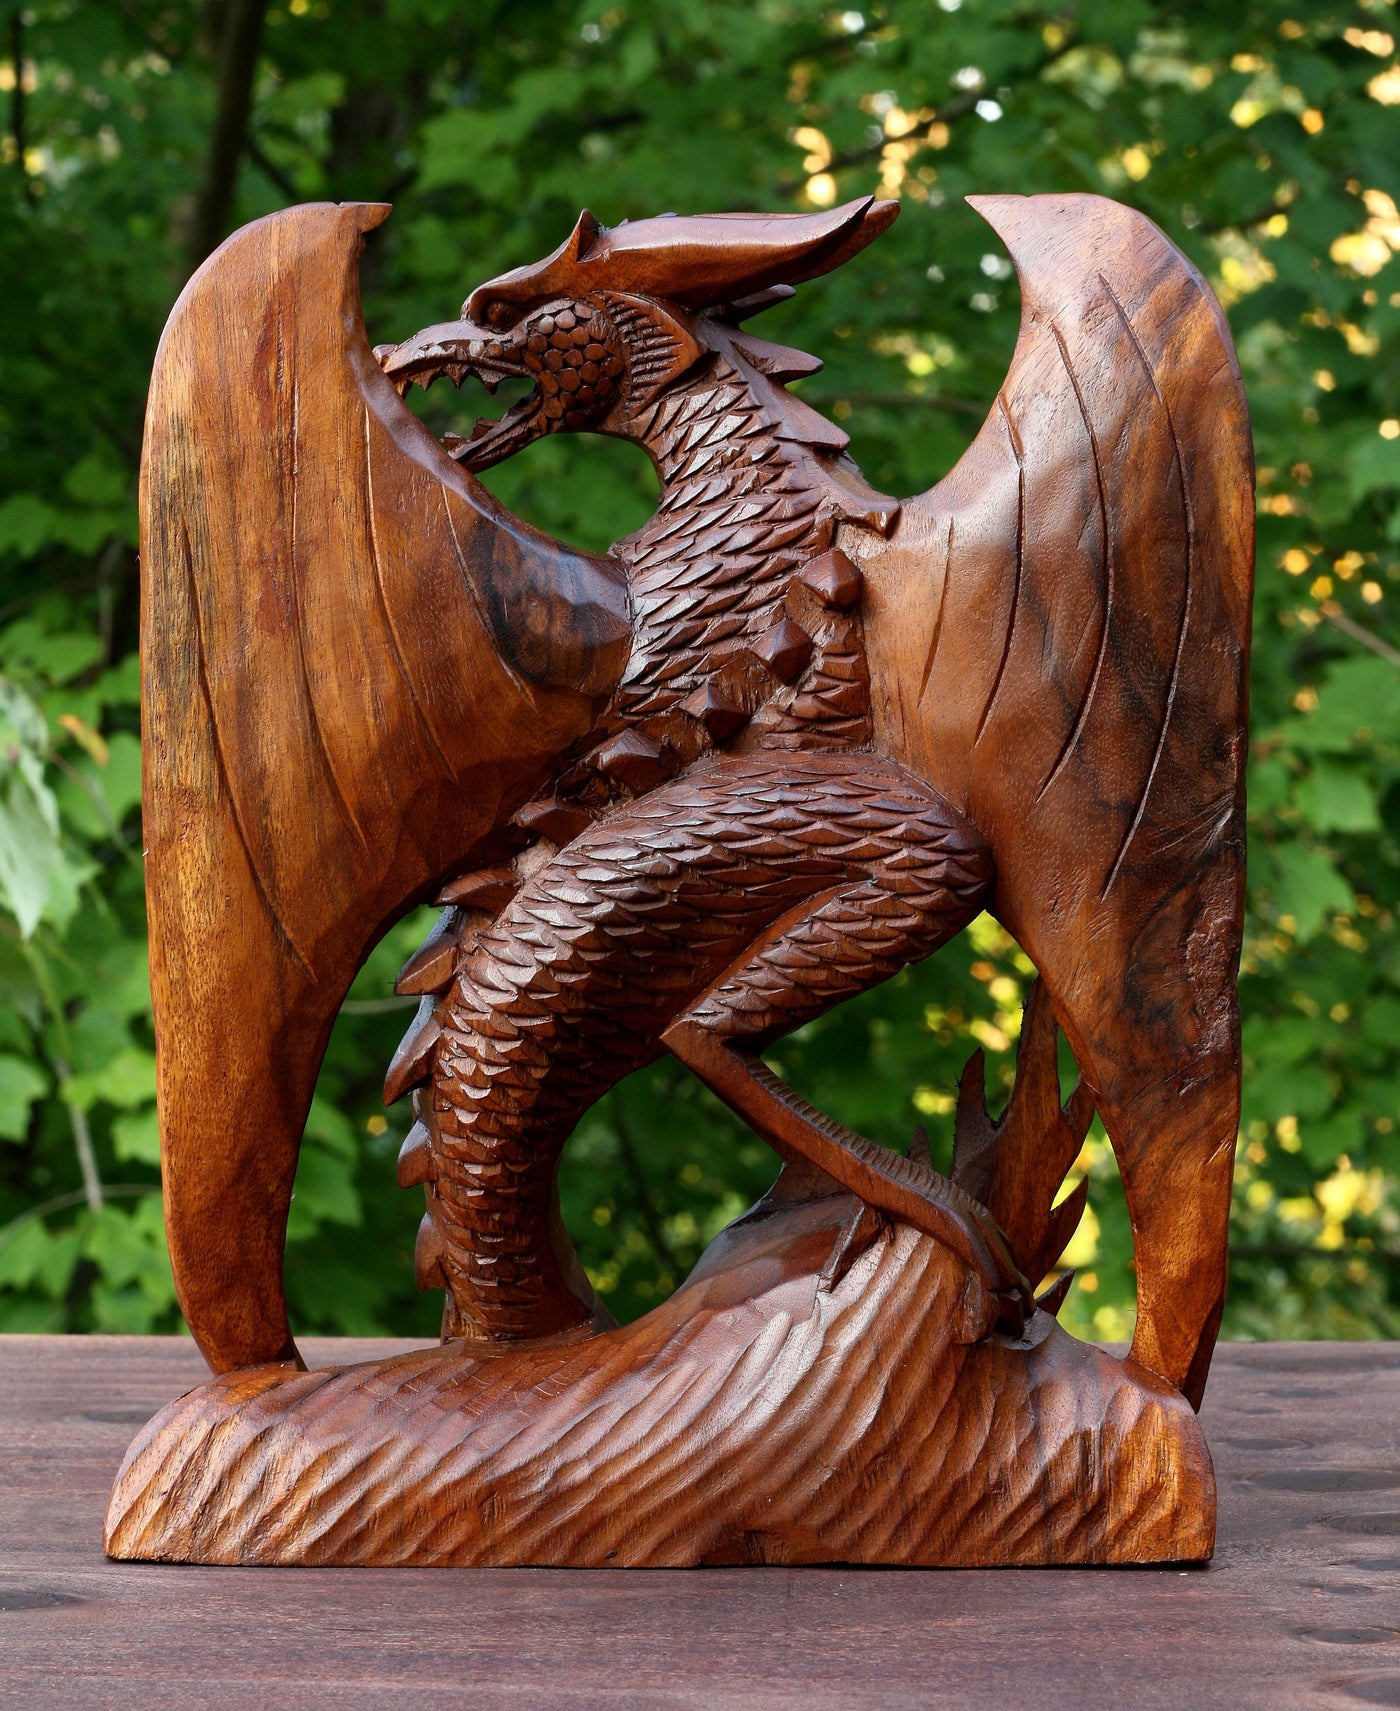 Wooden Crawling Dragon Handmade Sculpture Statue Handcrafted Gift